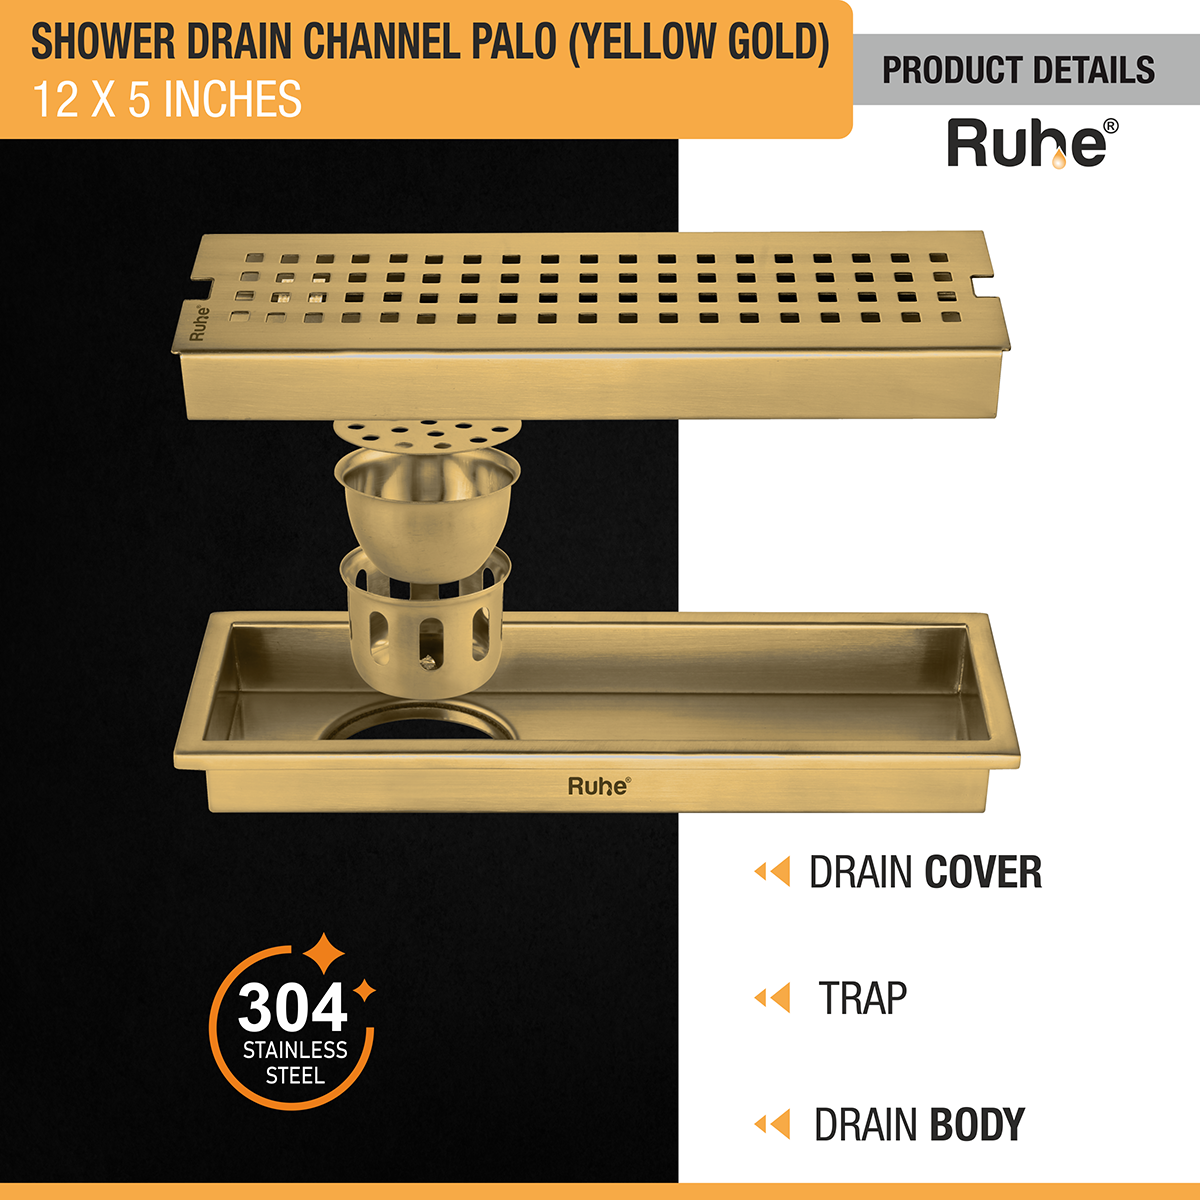 Palo Shower Drain Channel (12 x 5 Inches) YELLOW GOLD product details